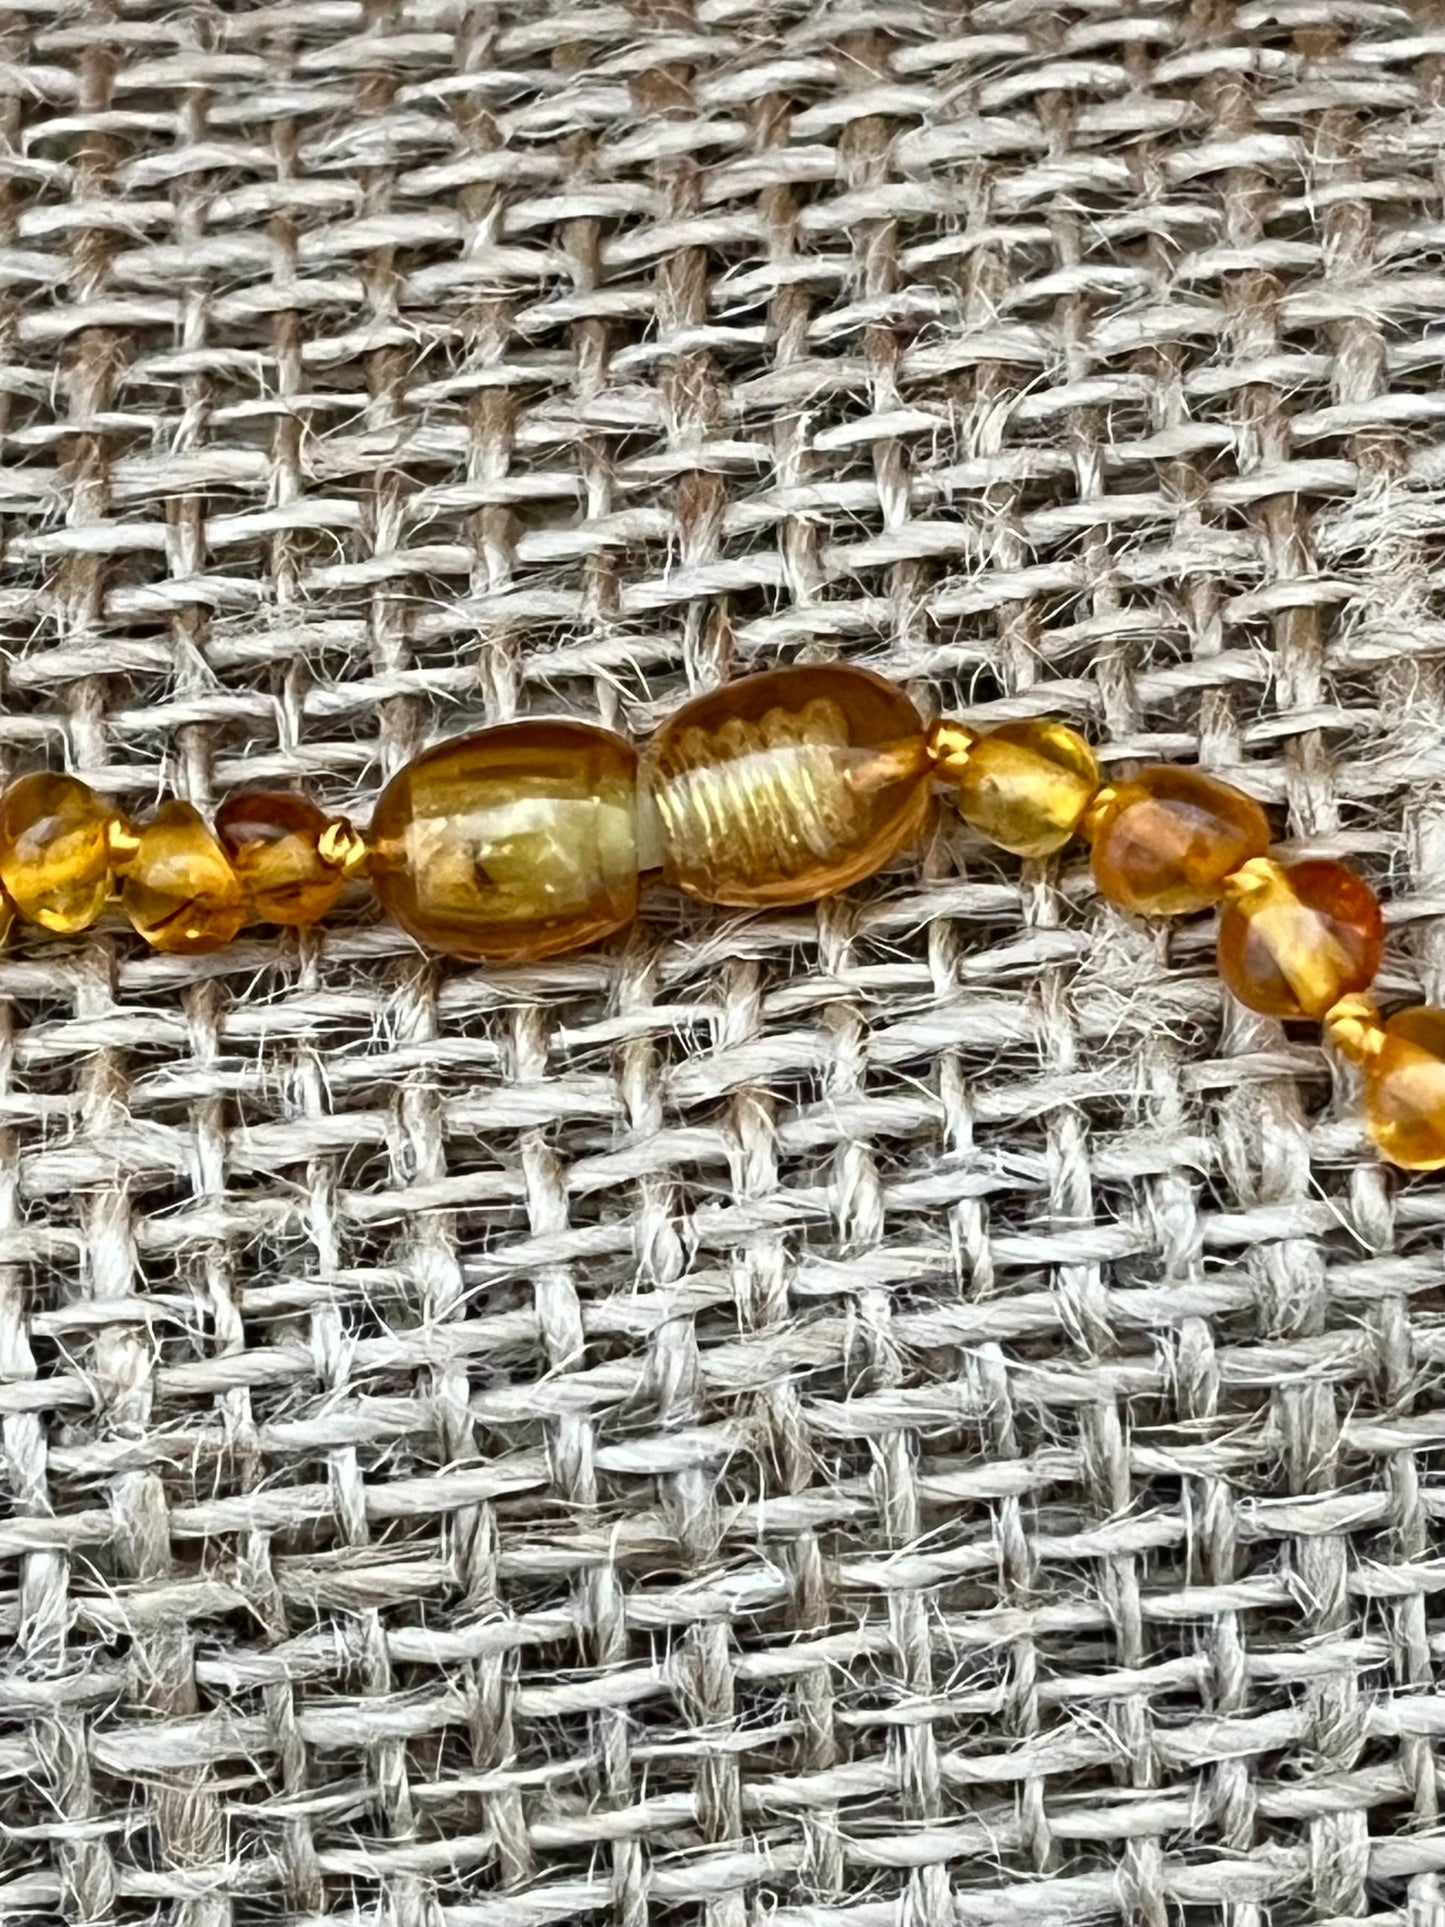 AMBER NECKLACE - for Baby, or young child, 2 choices!